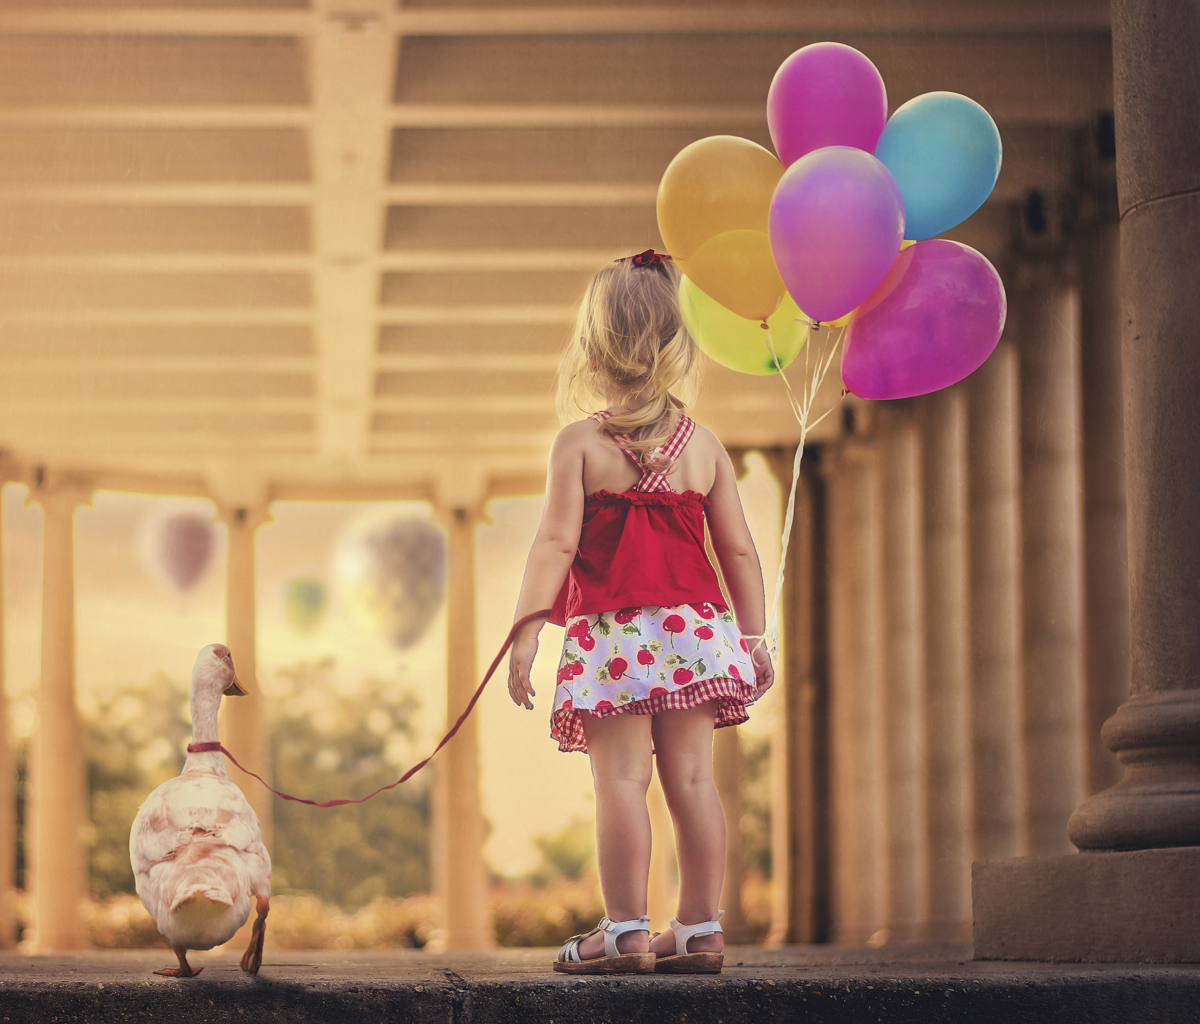 Little Girl With Colorful Balloons screenshot #1 1200x1024